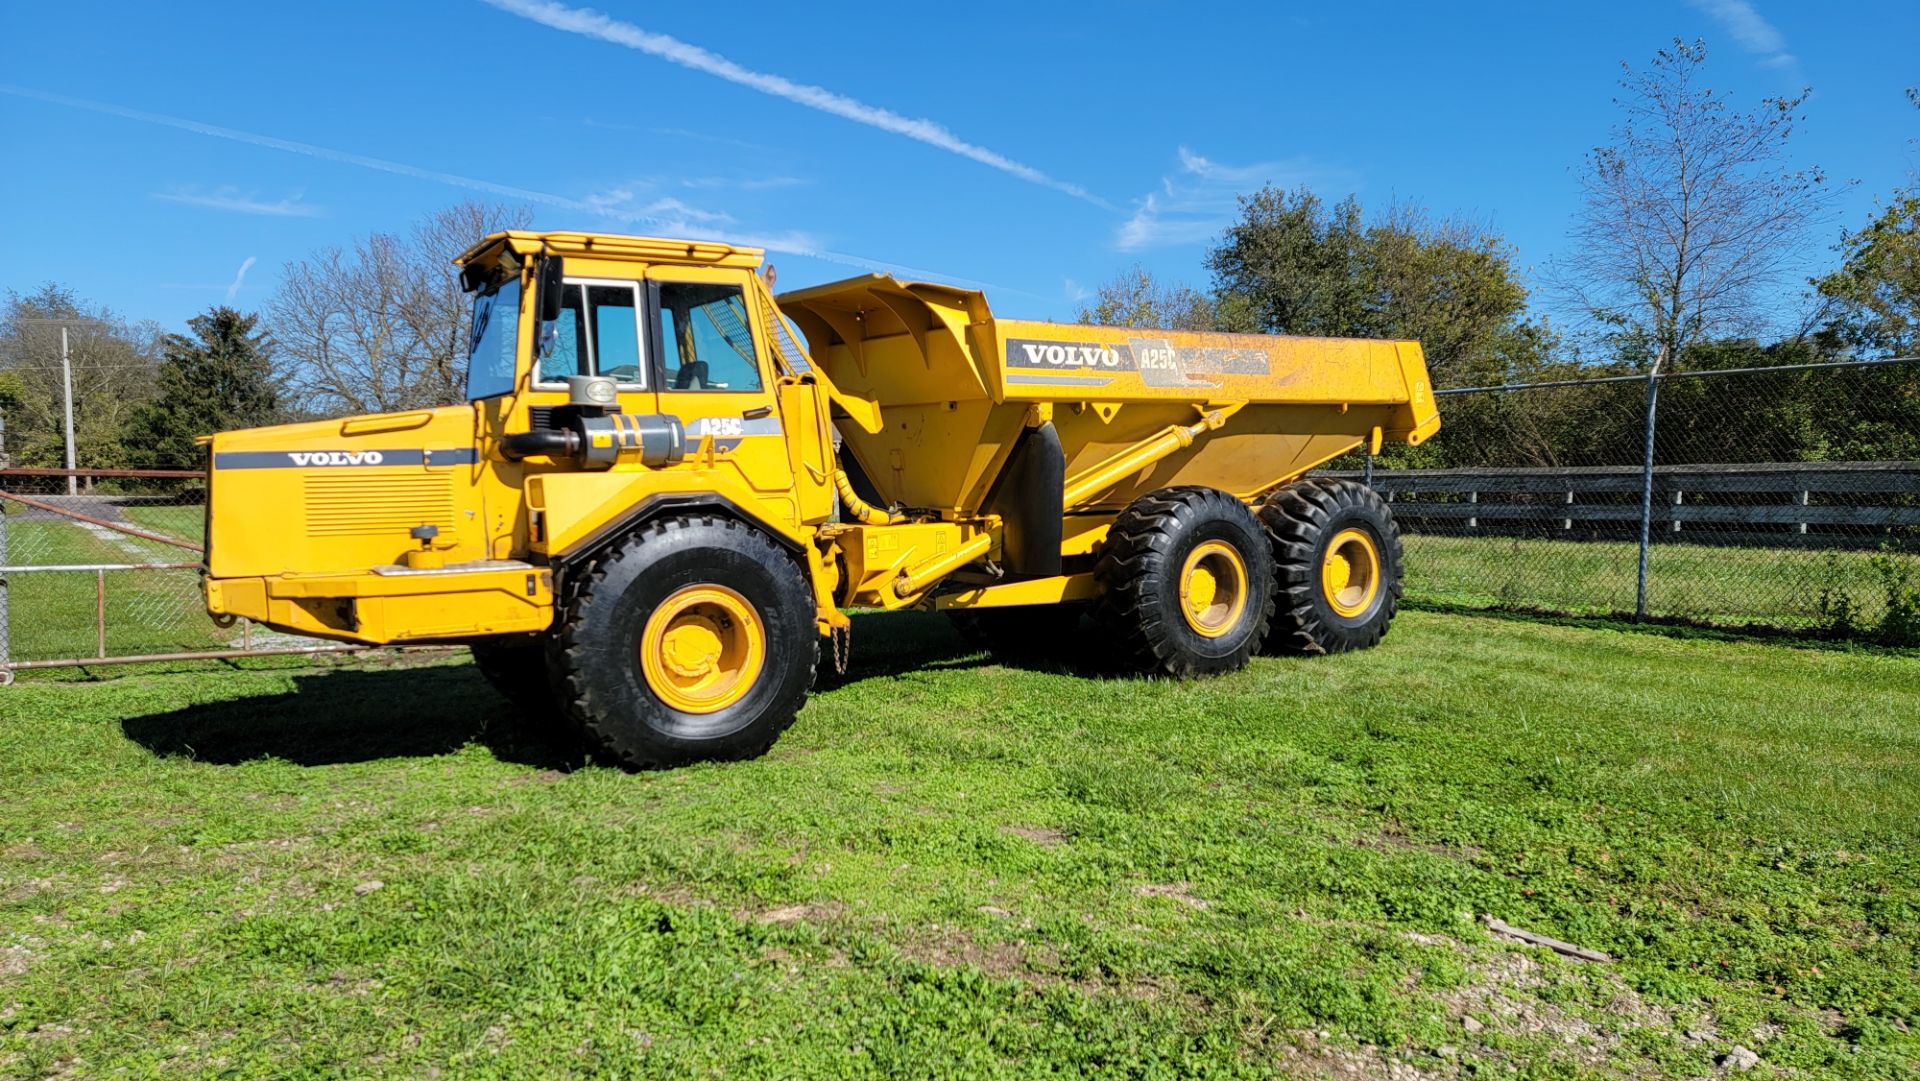 Volvo A25C 6x6 Offroad Dump Truck, 30,519 Miles, 12,411 Hours, s/n 5350V61011 - Image 6 of 34